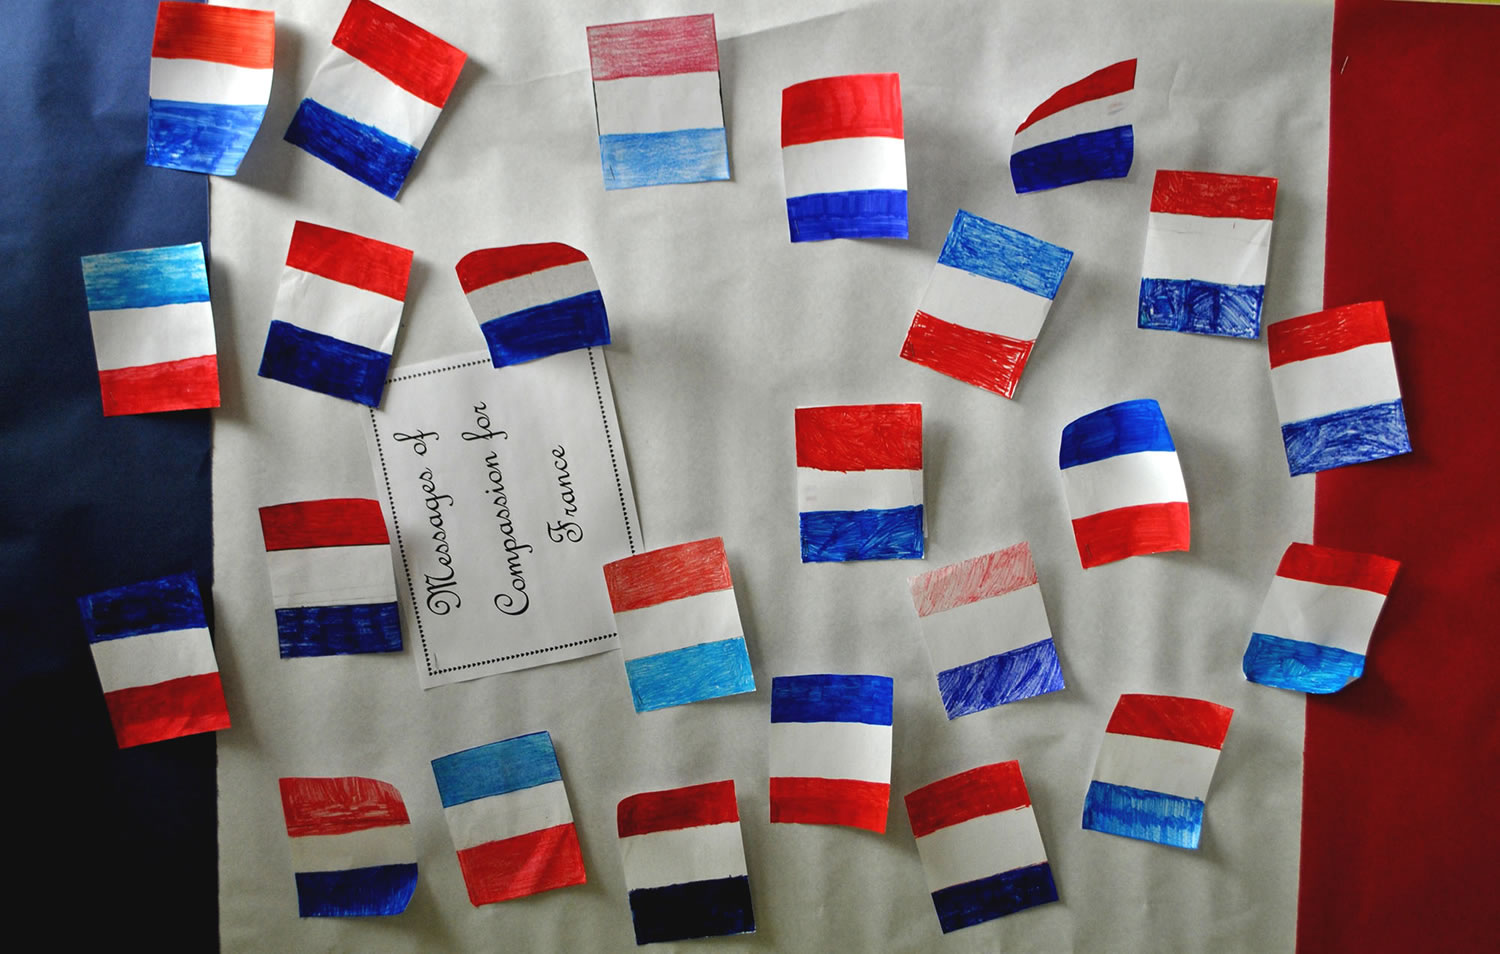 Battle Ground: After the attacks in Paris, River HomeLink art teacher Traci Donahue had her students make tiny French flags, write letters and paint French landmarks, and shipped over the care package to a school in Paris.